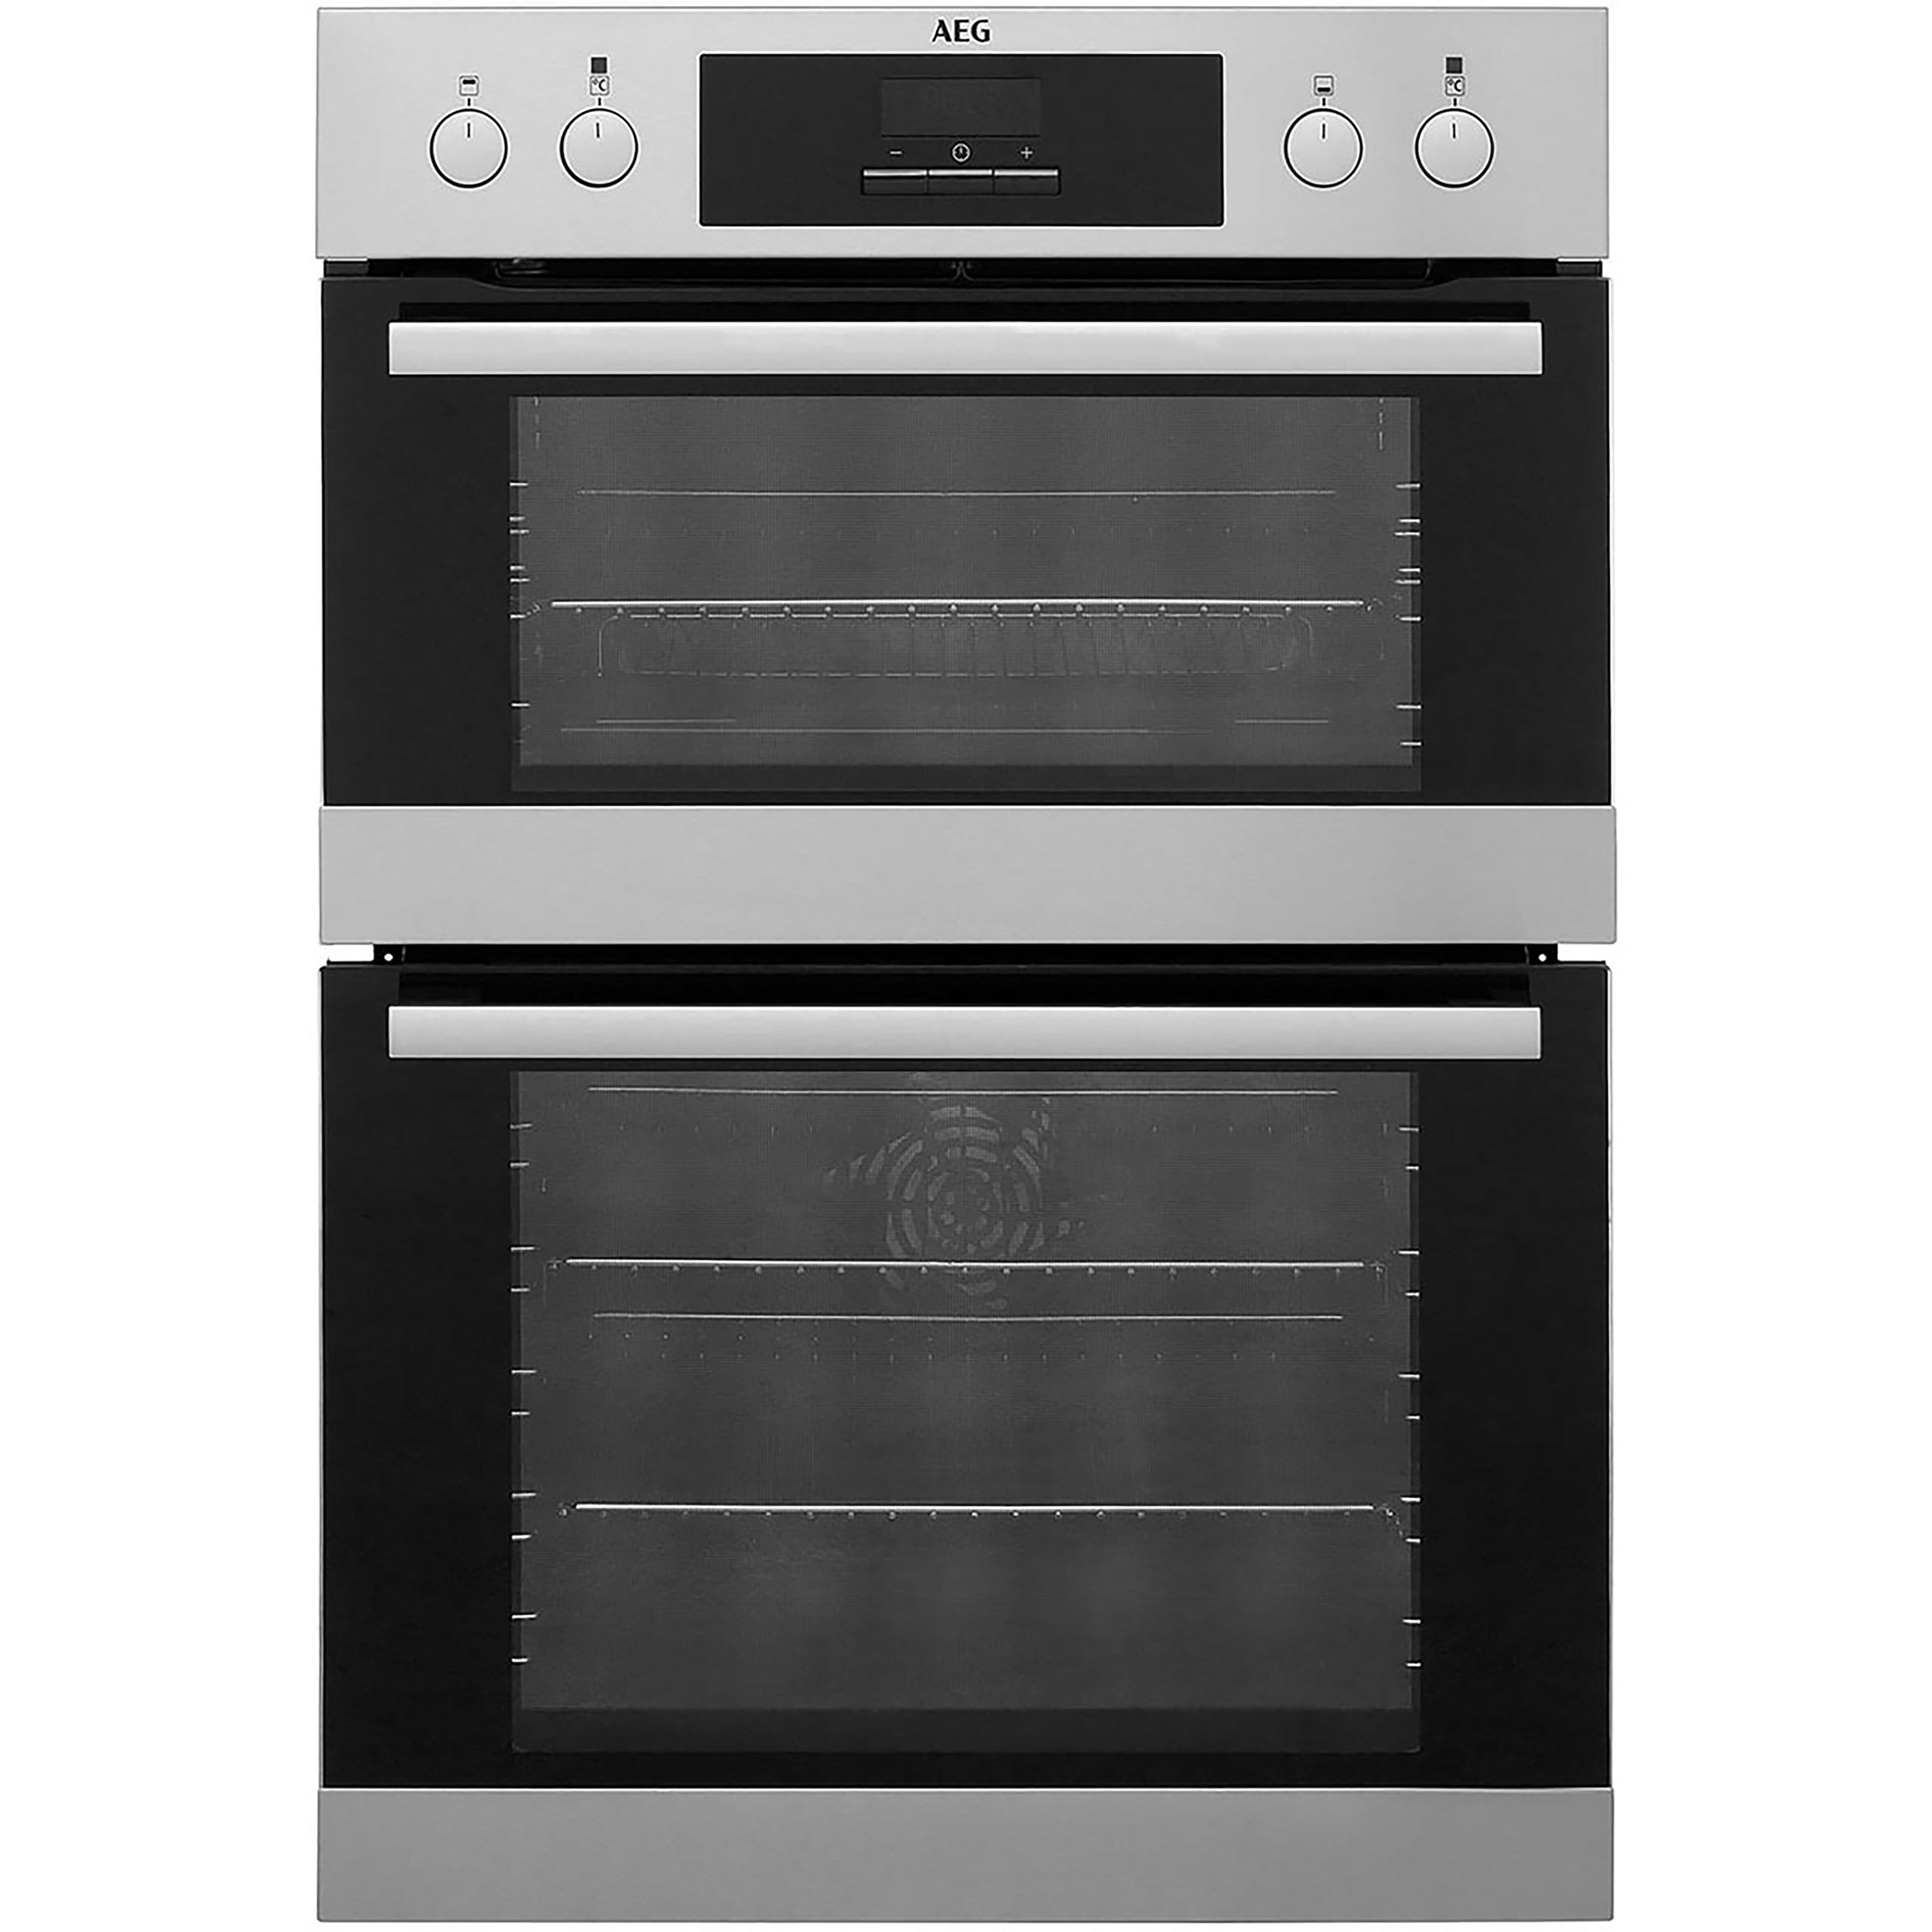 Where Is The Grill Pan Handle For My New AEG Oven?